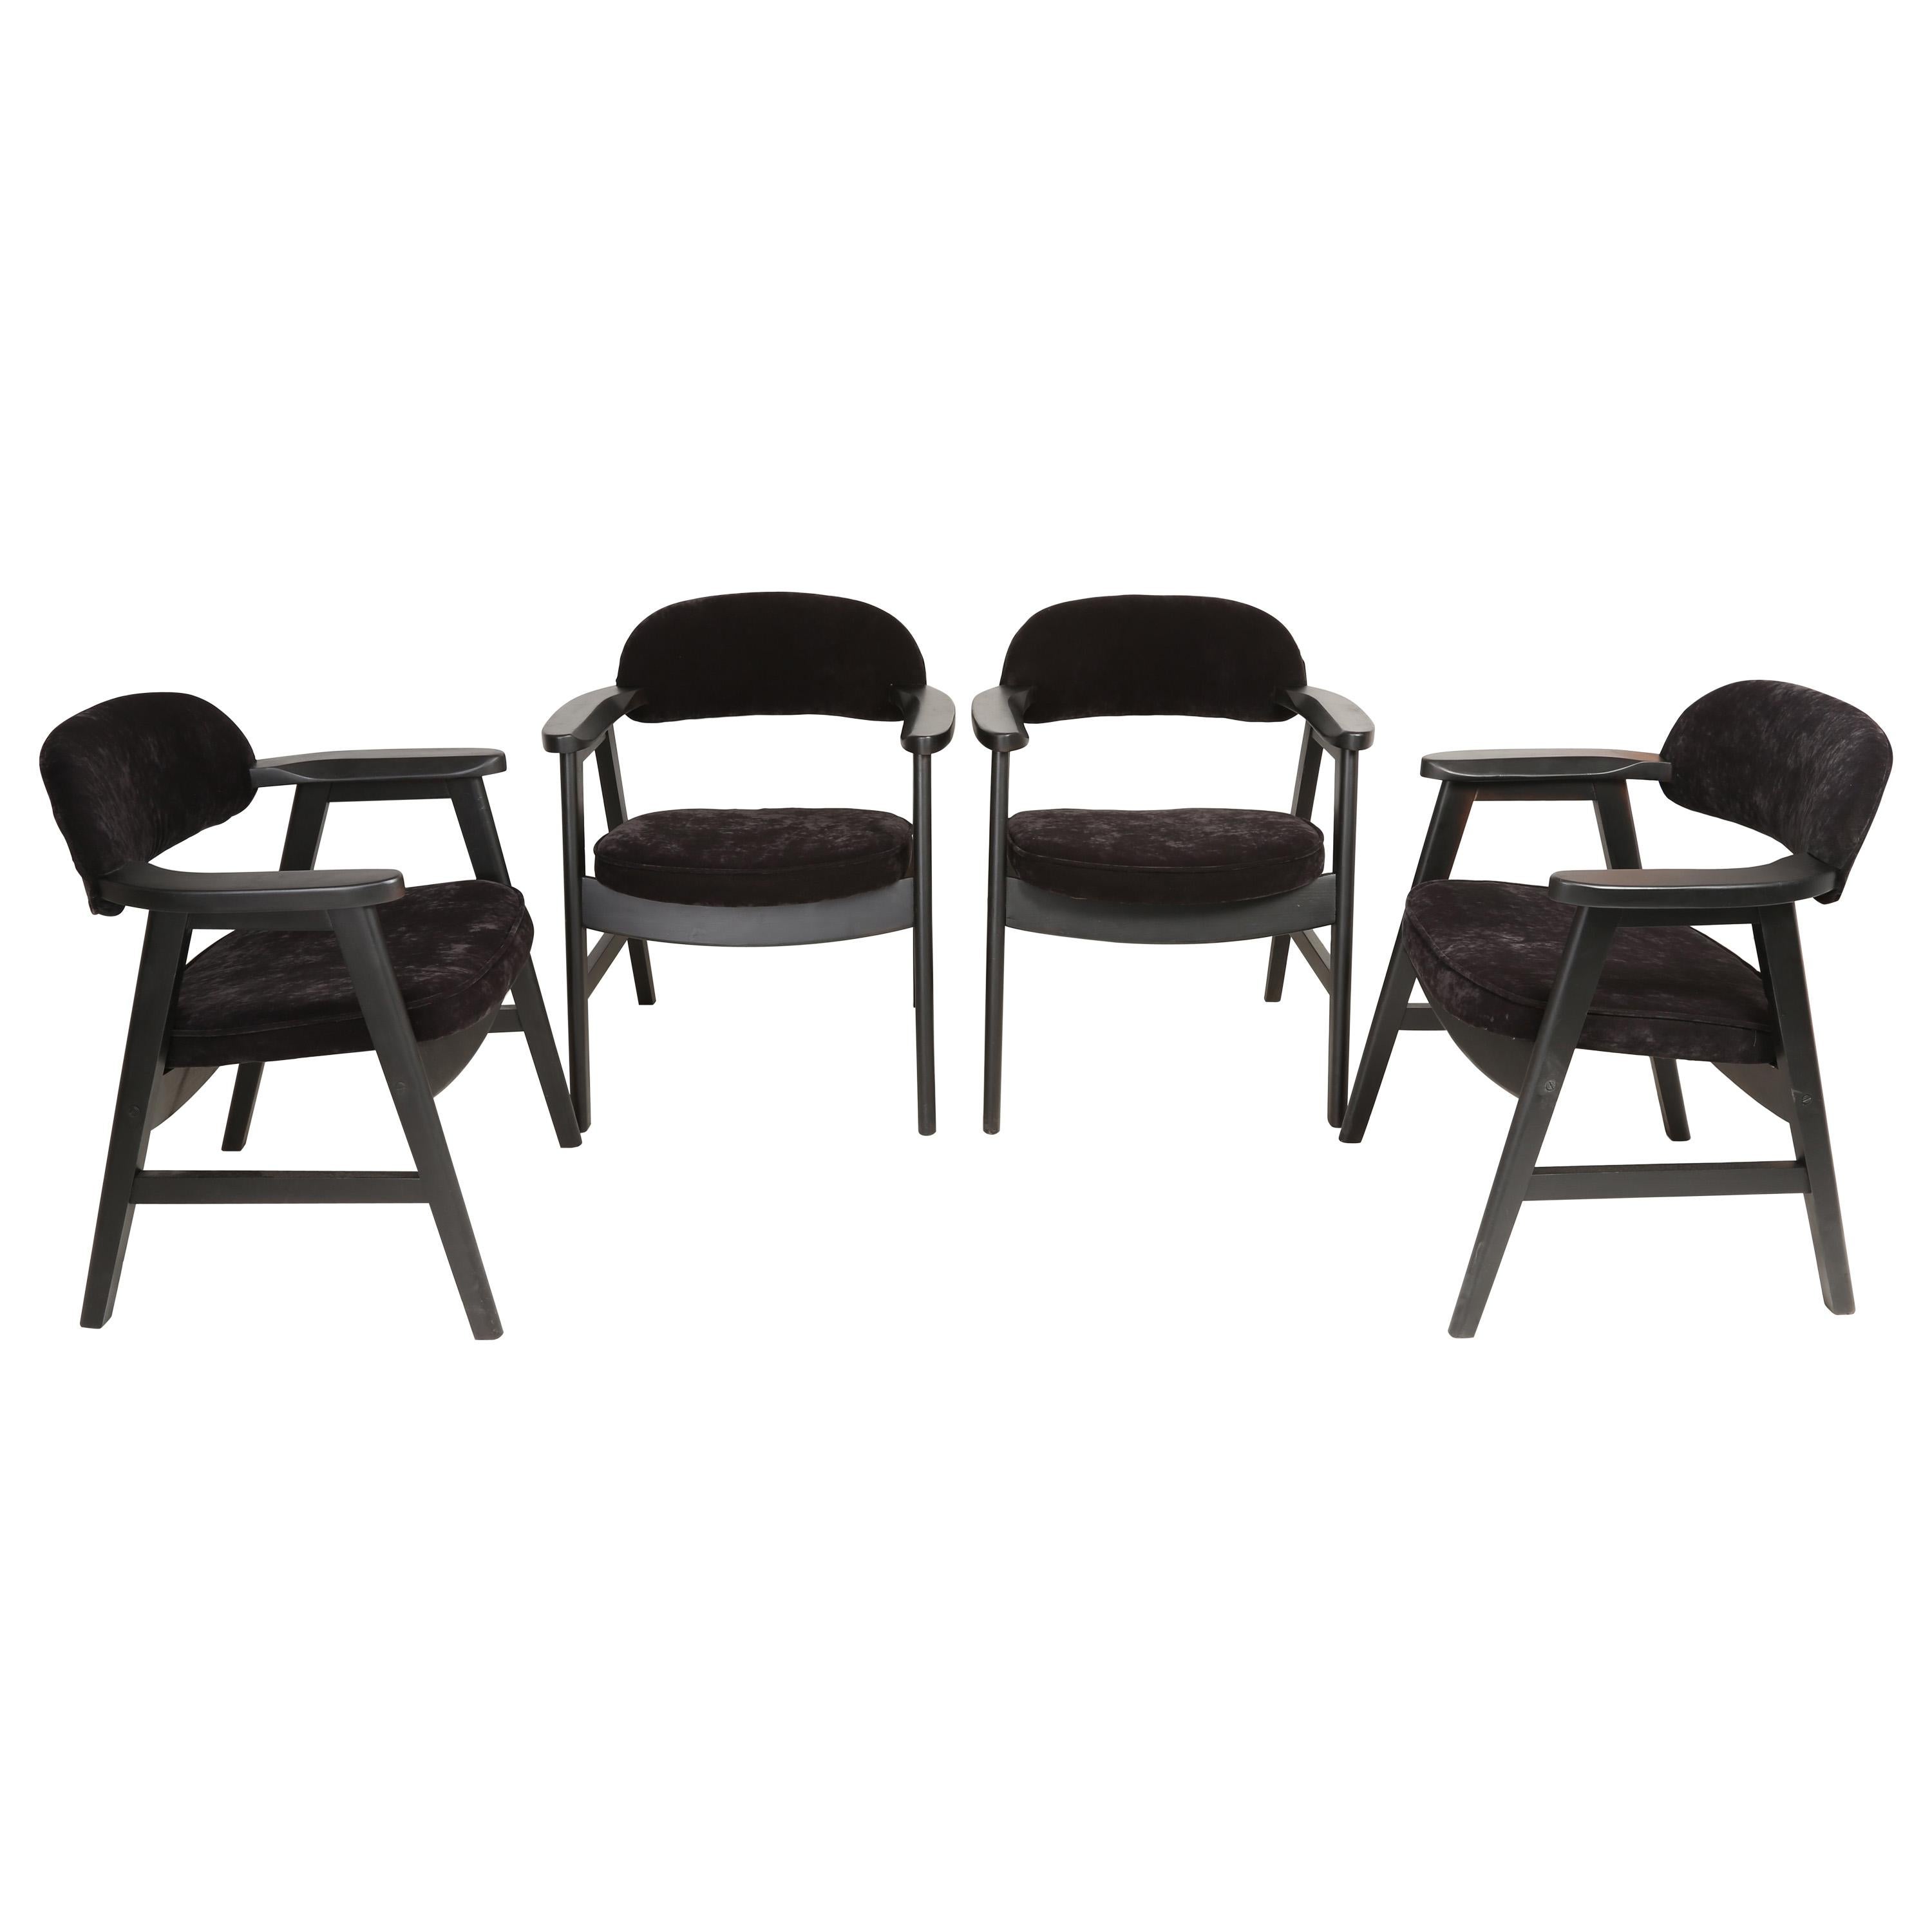 Set of Four 20th Century Buffalo Black Wood and Velvet Chairs, 1960s For Sale